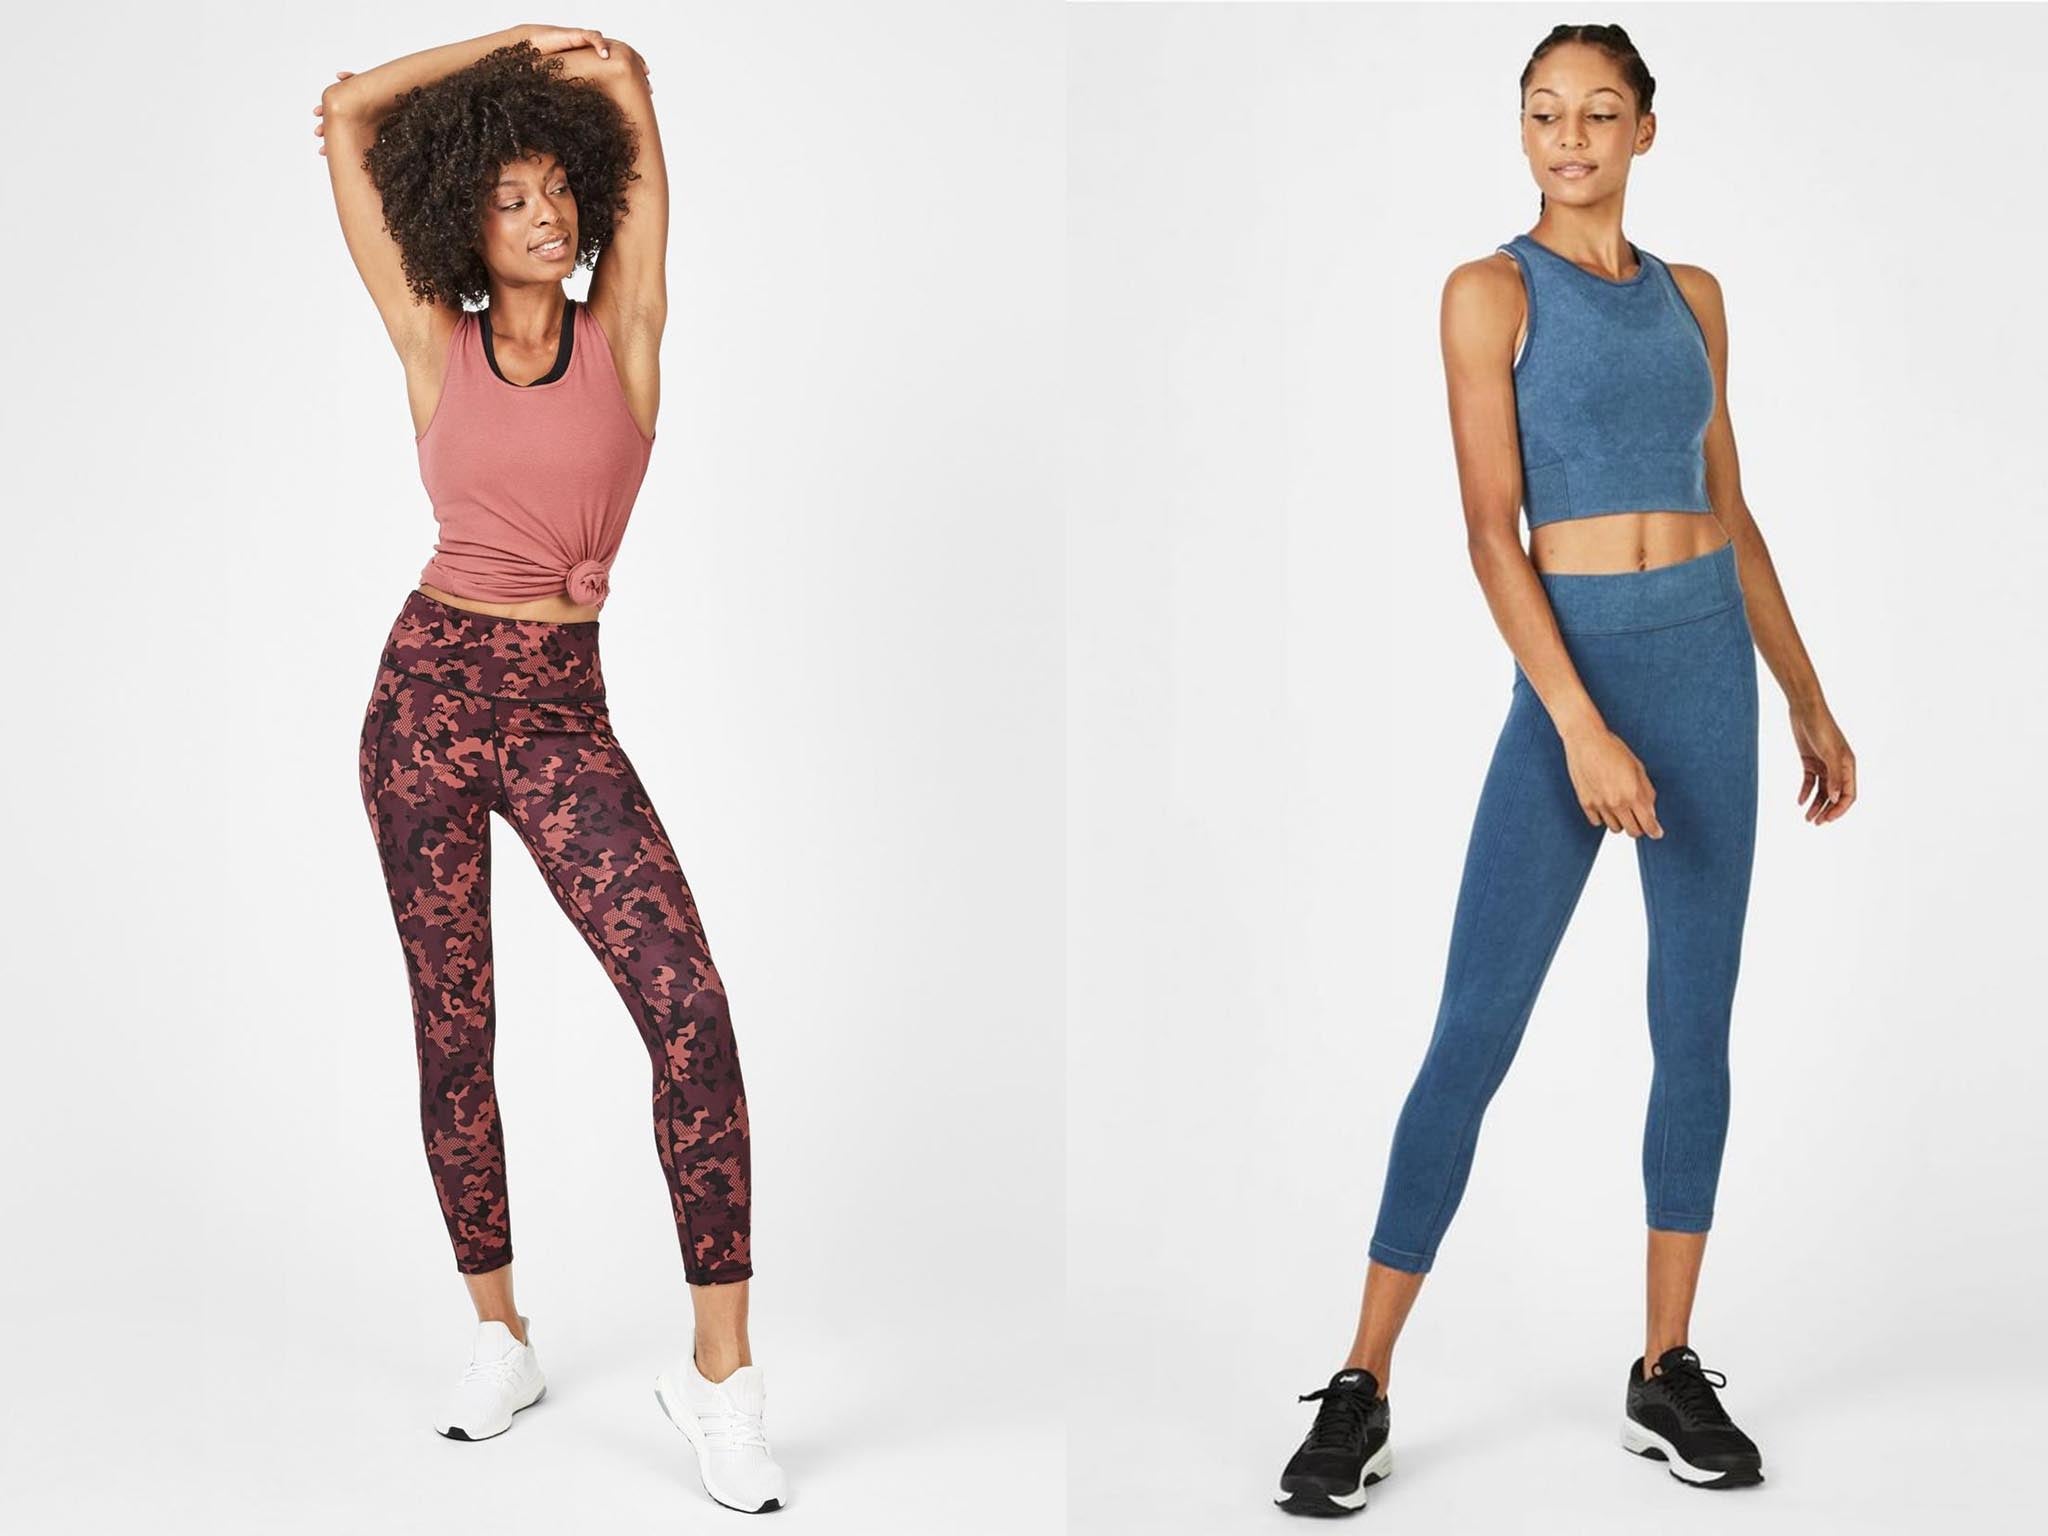 Stock up on high-tech sportswear, including leggings, shorts and sports bras